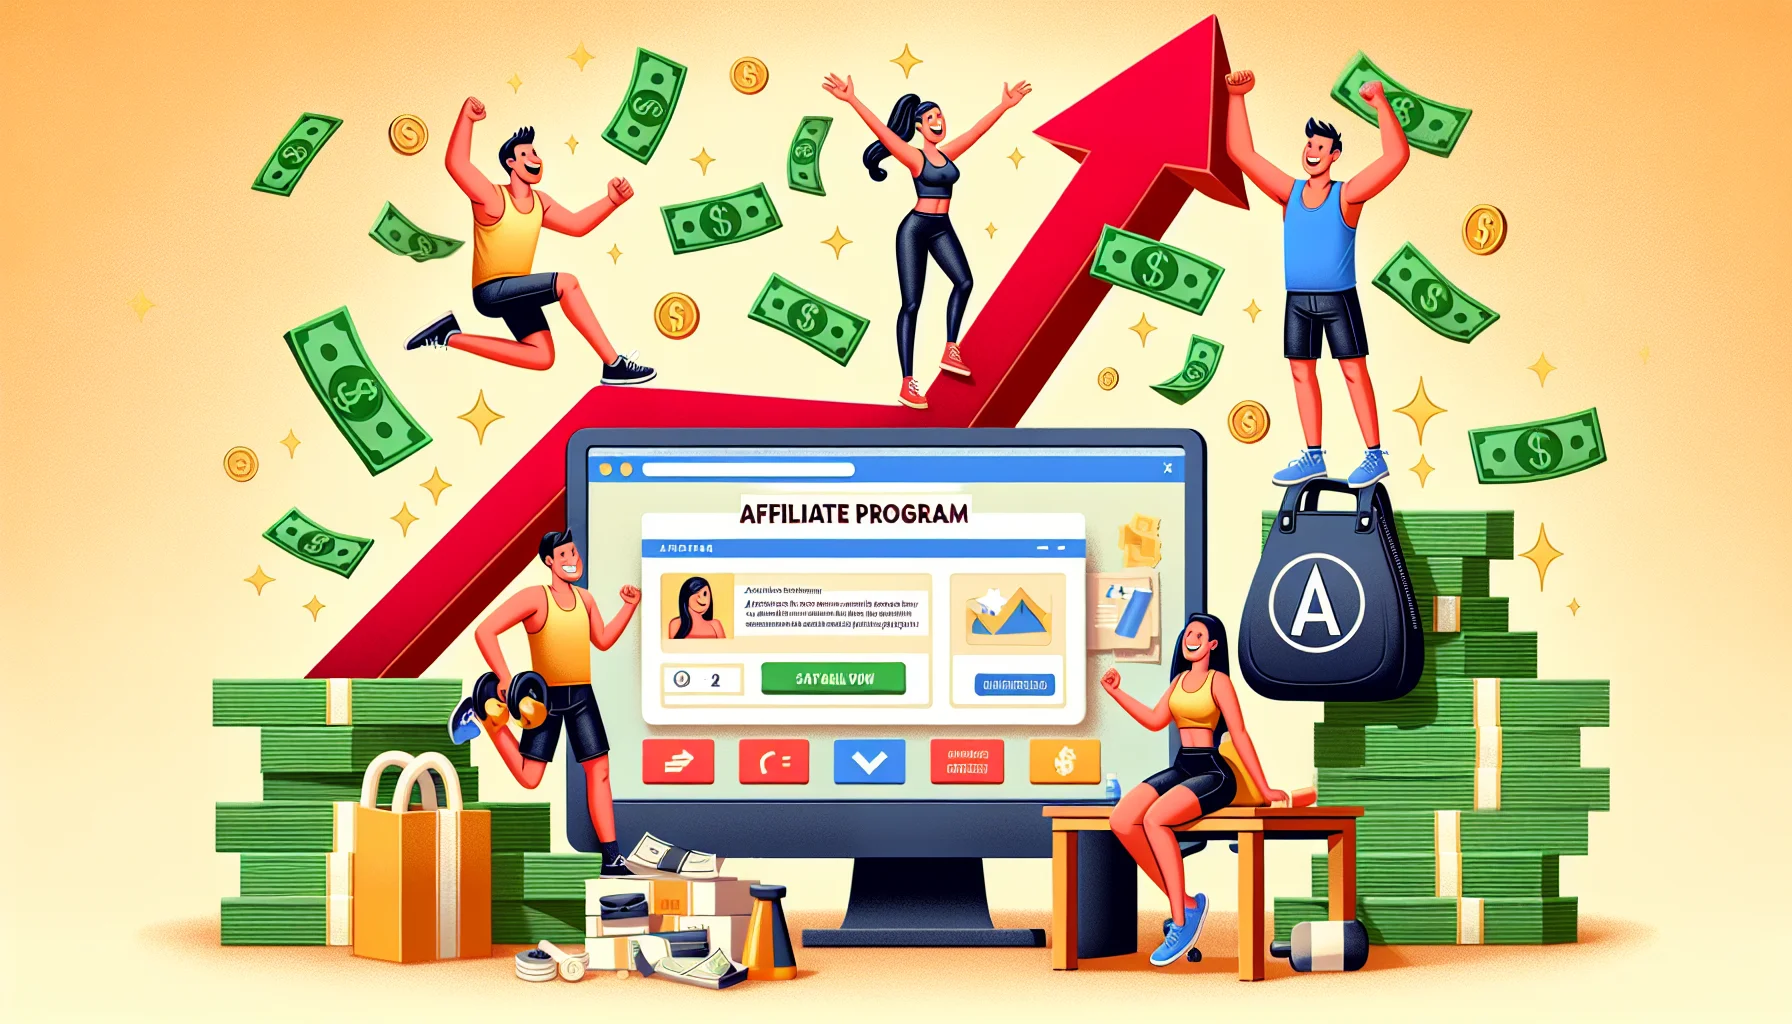 Illustrate a humorous and realistic scene related to online money-making with the theme of a fitness affiliate program. The interactions should involve a computer, a gym bag, and stacks of paper money. The screen of the computer should highlight an understandable interface with the word 'Affiliate Program'. Have a large upward-pointing arrow and several individuals rejoicing in vibrant colors, along with text captions around them mentioning success stories about their earnings. Make sure to forego individuals' connection to certain races or genders, keep them as diverse silhouettes to maintain inclusivity.